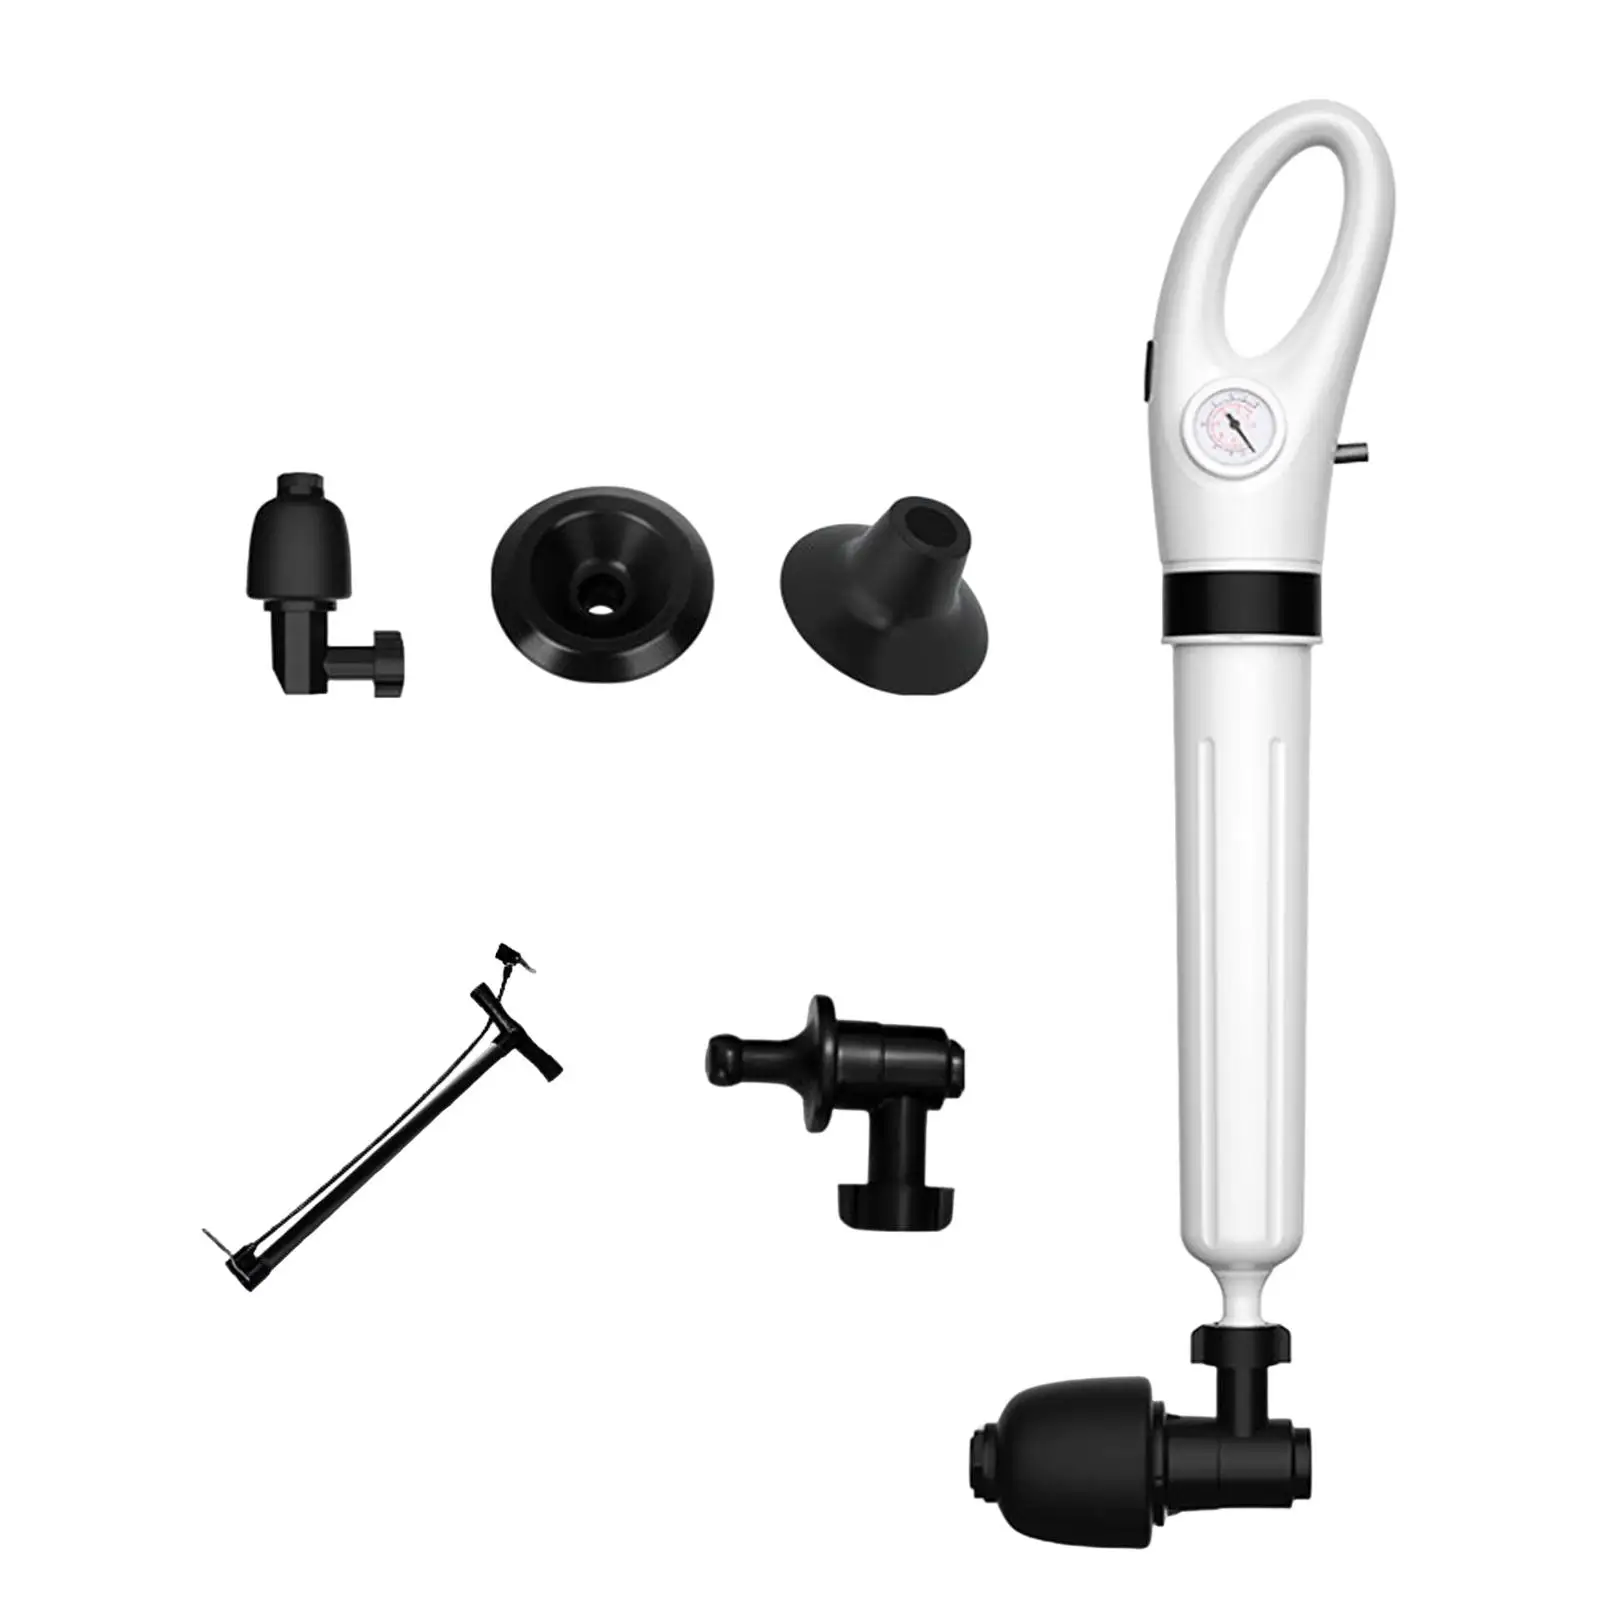 Air Drain Blaster Kit Air Toilet Unclogger Plumbing Tools High Pressure Toilet Plunger Kit for Home Shower Kitchen Clogged Pipe